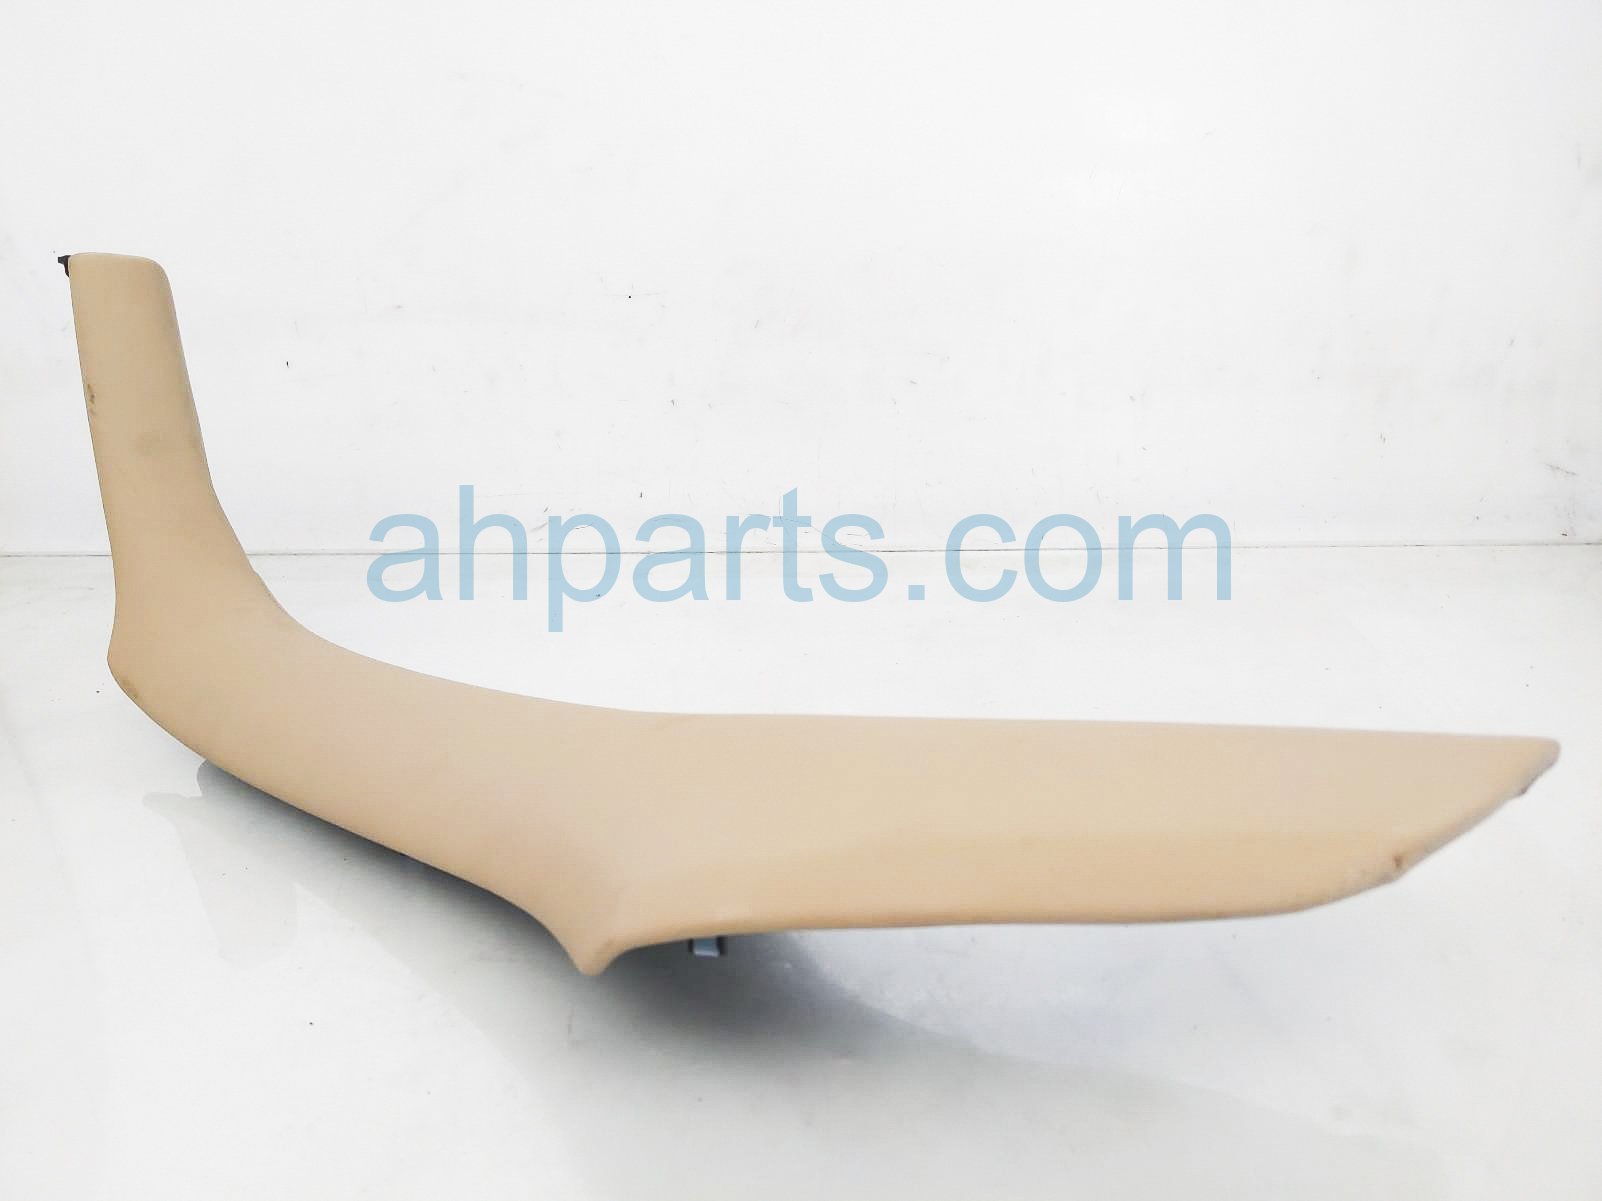 $50 Acura LH CONSOLE WRAPPED GARNISH - TAN